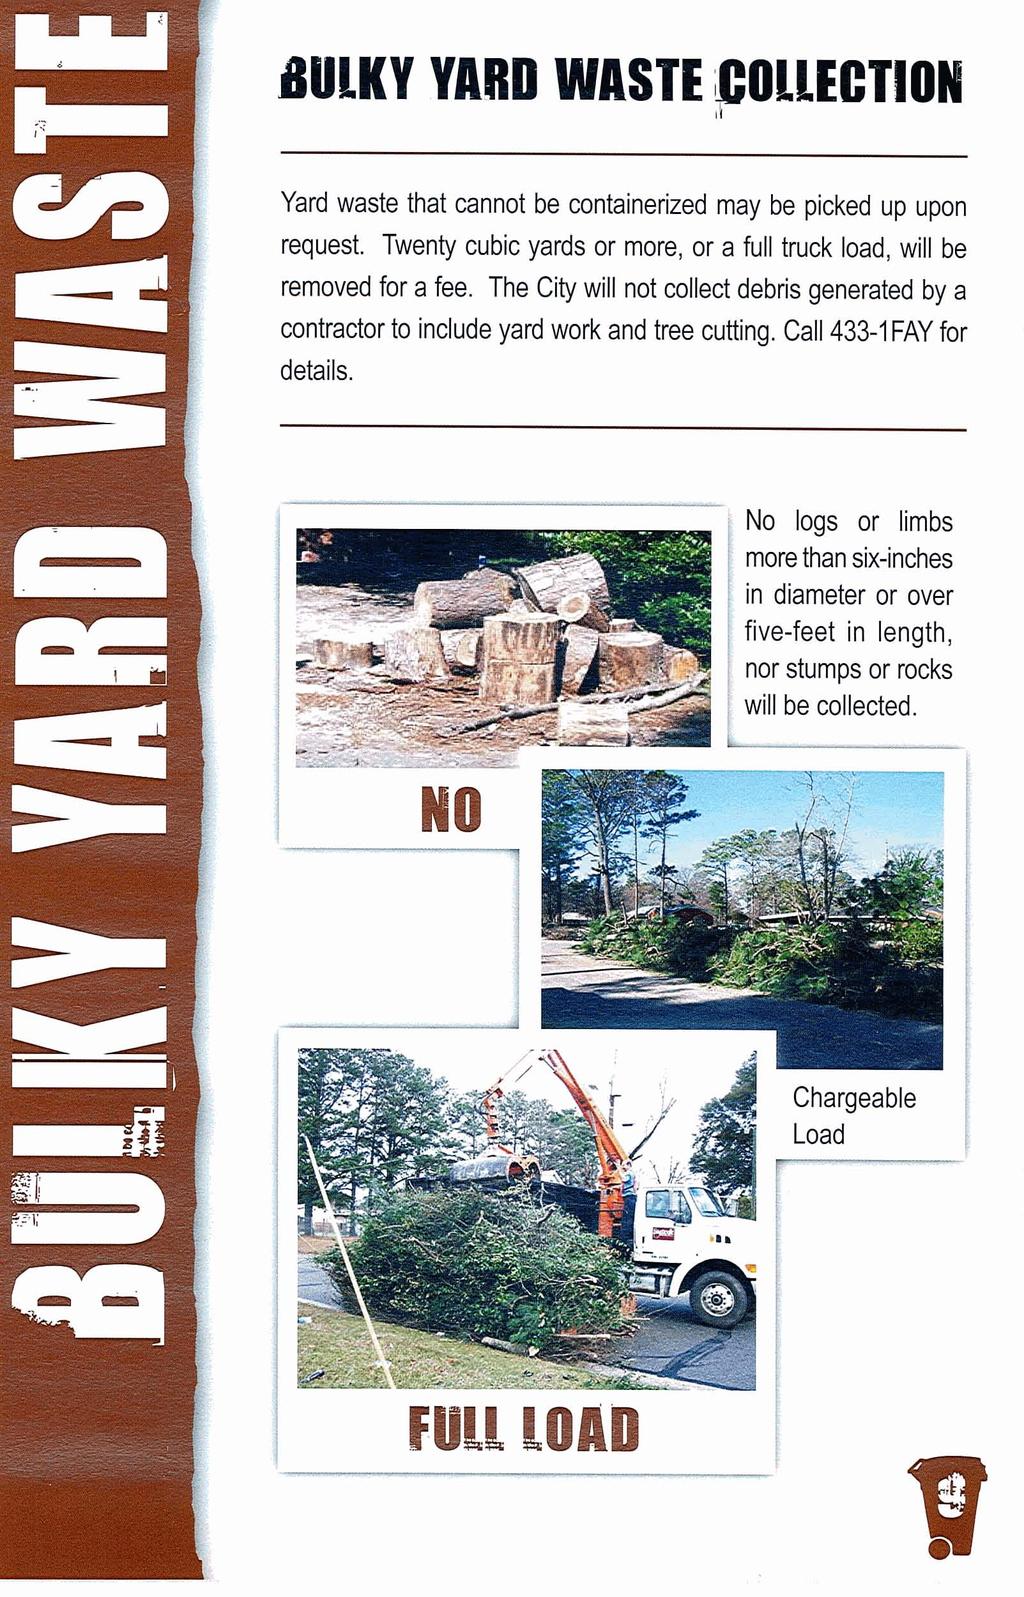 BULKY YARD WASTE POLLEETION Yard waste that cannot be containerized may be picked up upon request. Twenty cubic yards or more, or a full truck load, will be removed for a fee.